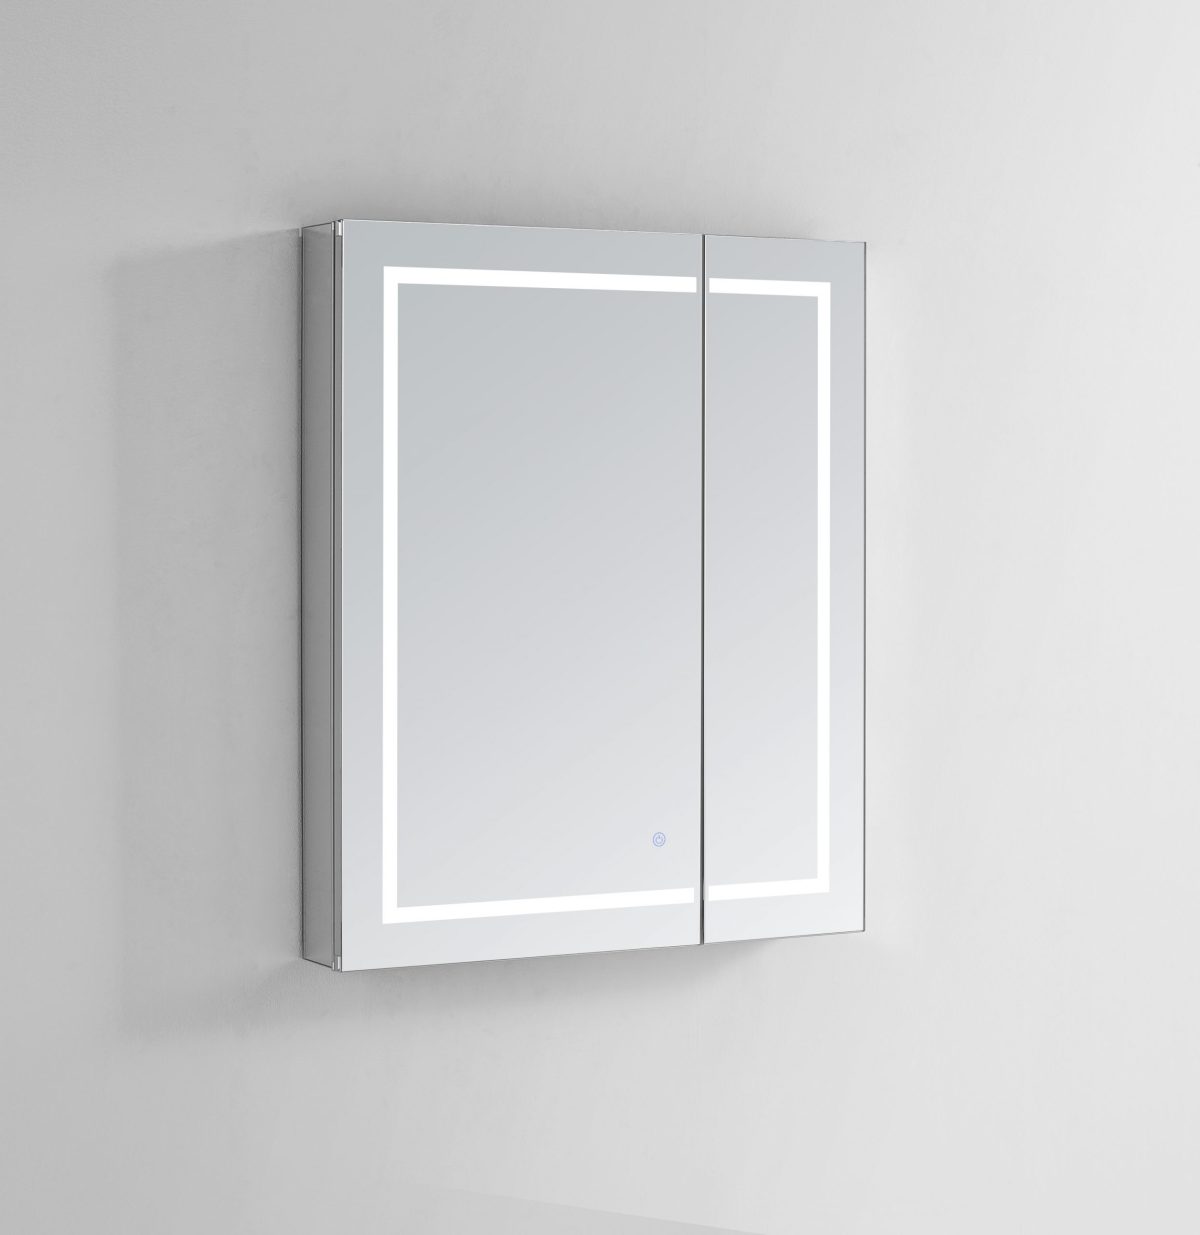 AQUADOM Royale Plus 30 inches x 30 inches LED Lighted Mirror Glass Medicine Cabinet for Bathroom